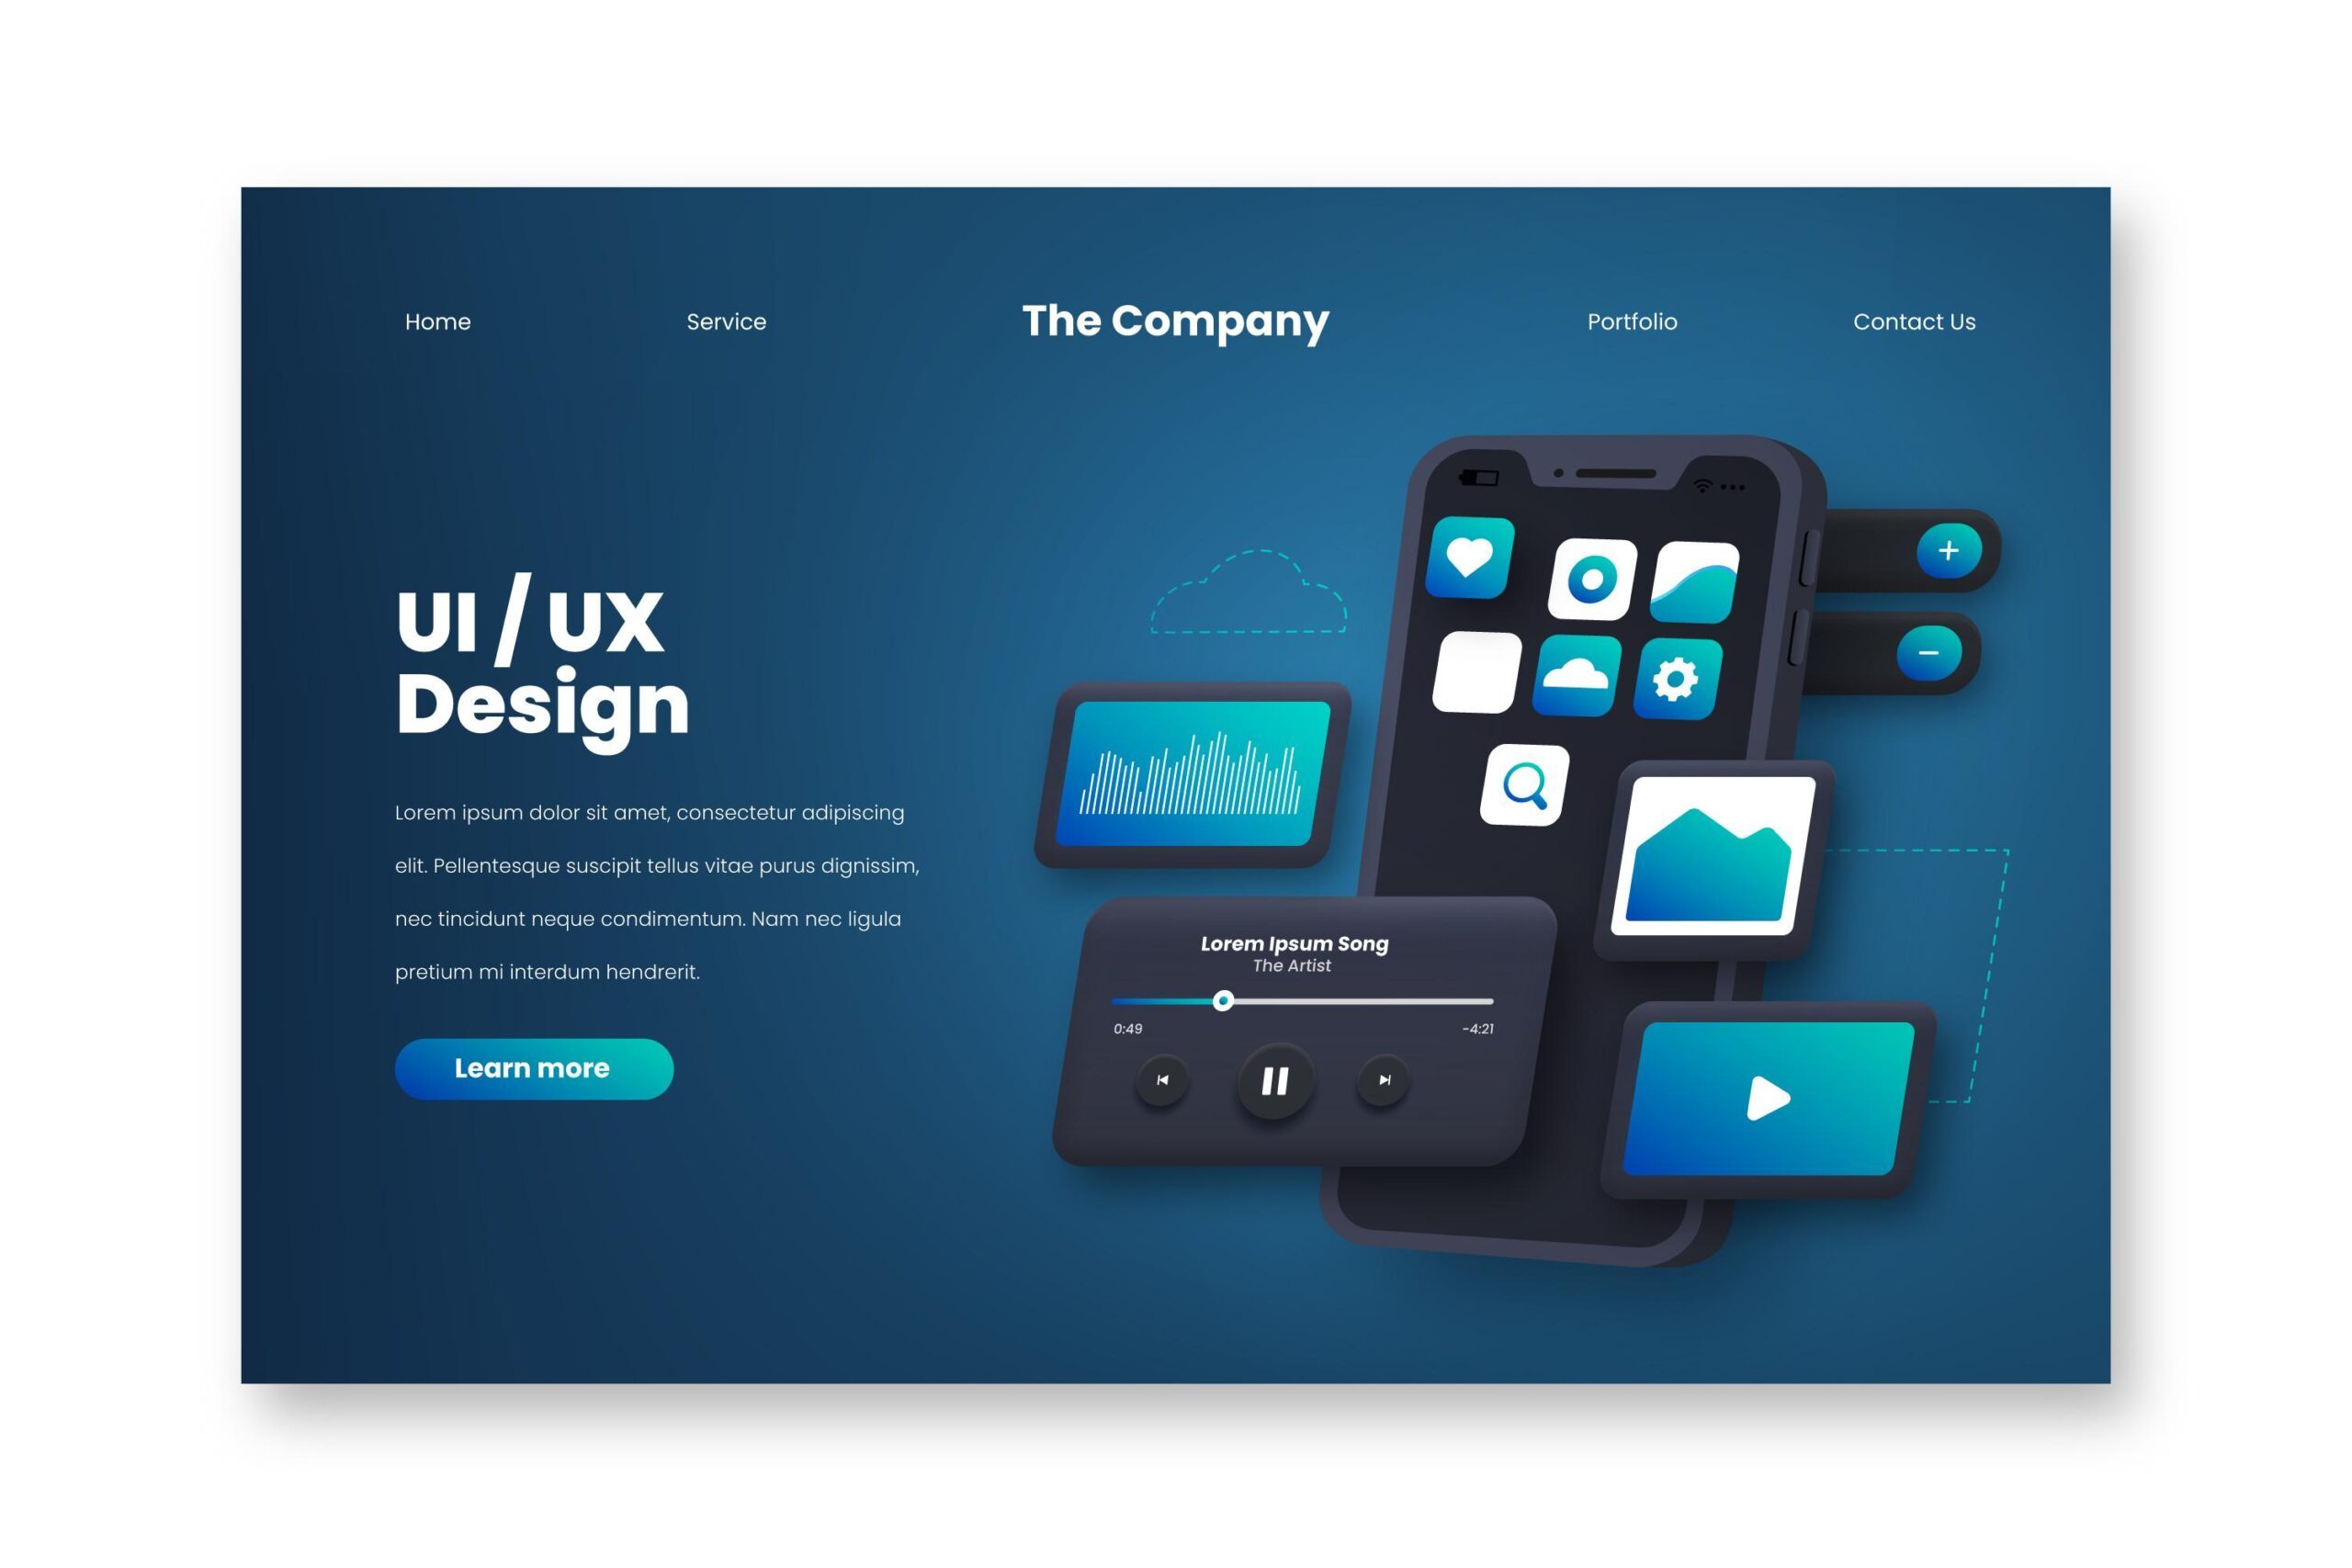 Designing for Responsive Web Apps Challenges and Solutions